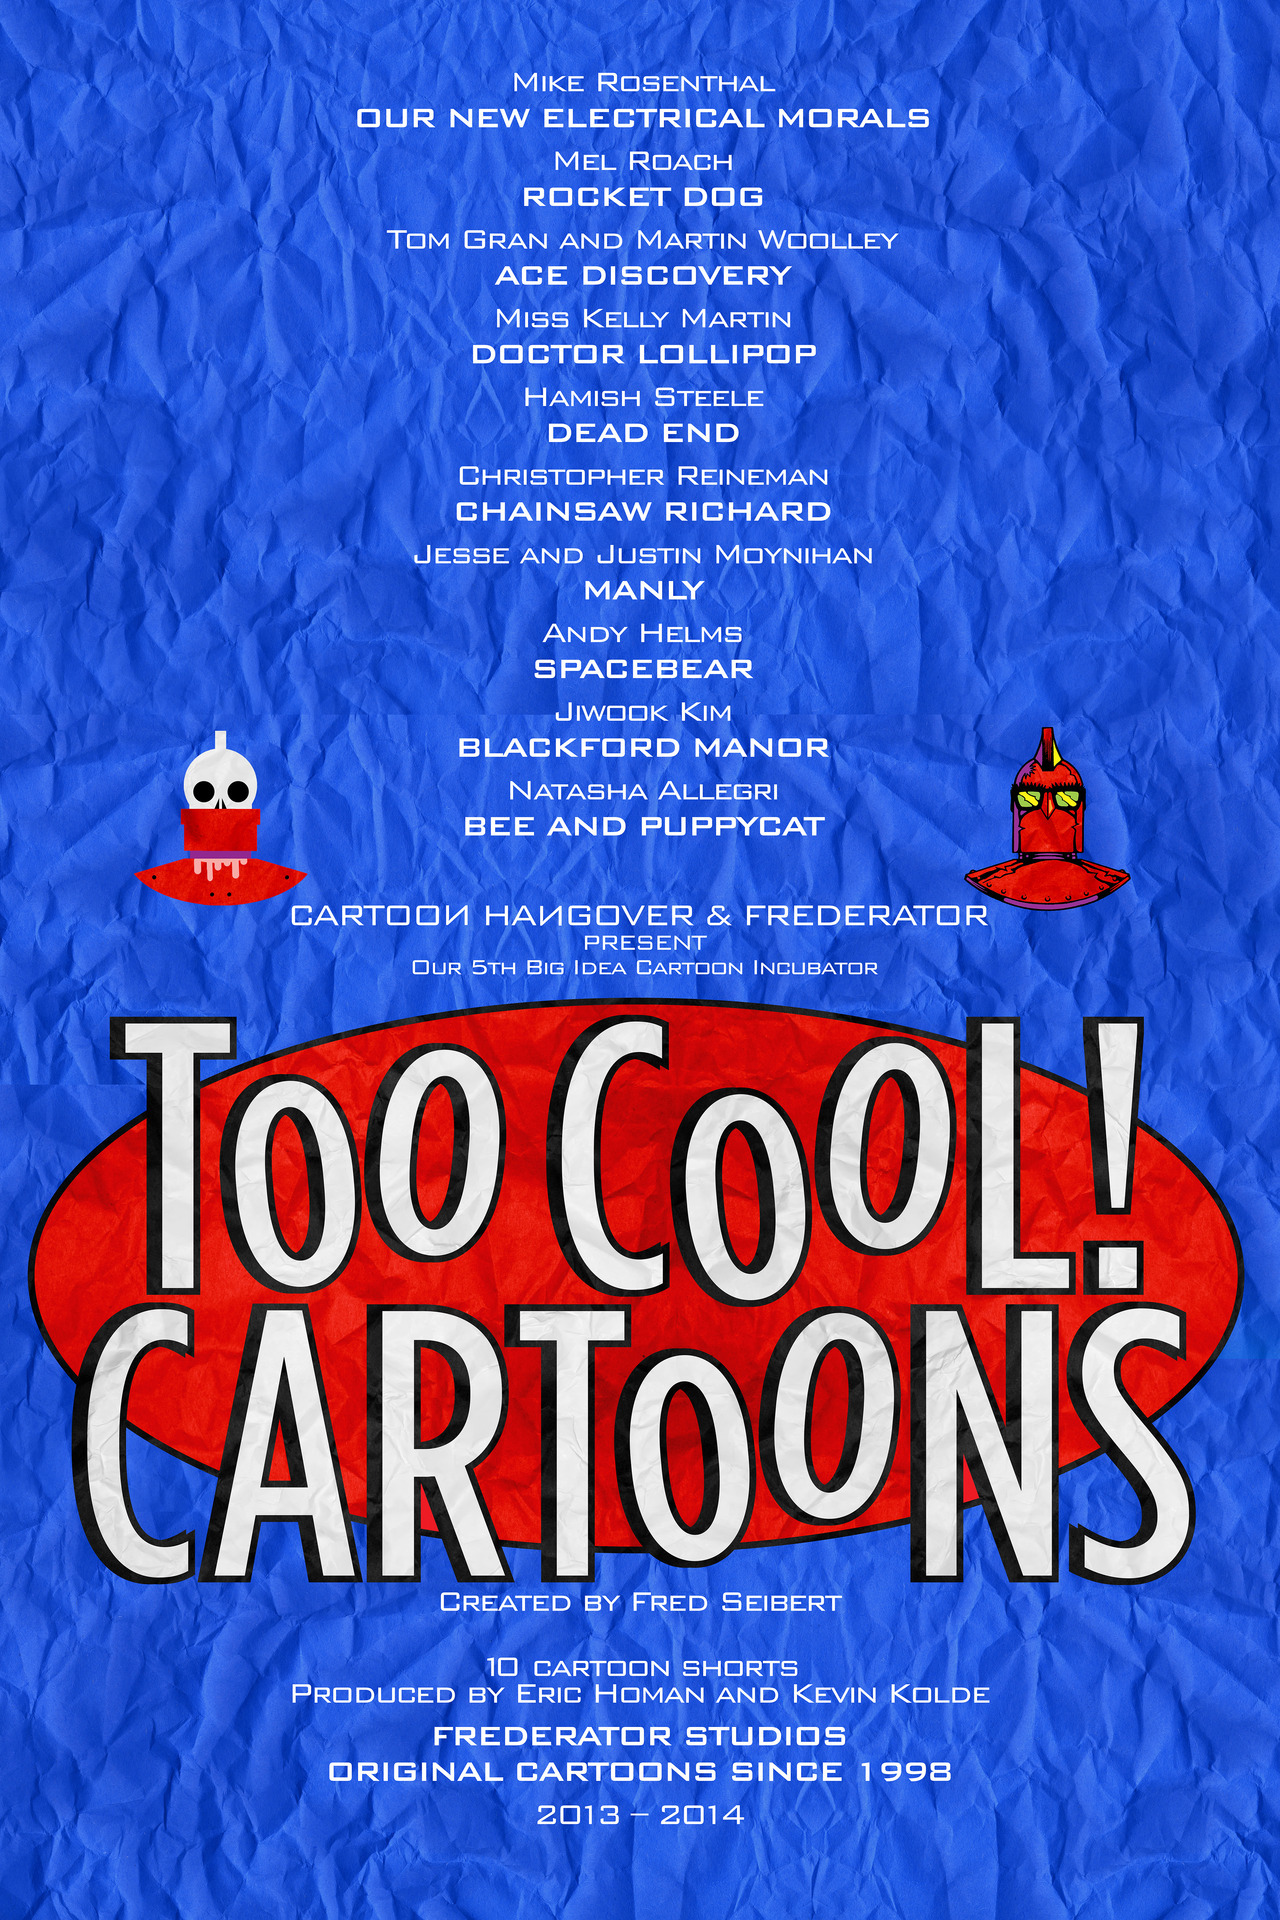 We love this Too Cool! Cartoons poster (and not just because Fred designed it)…